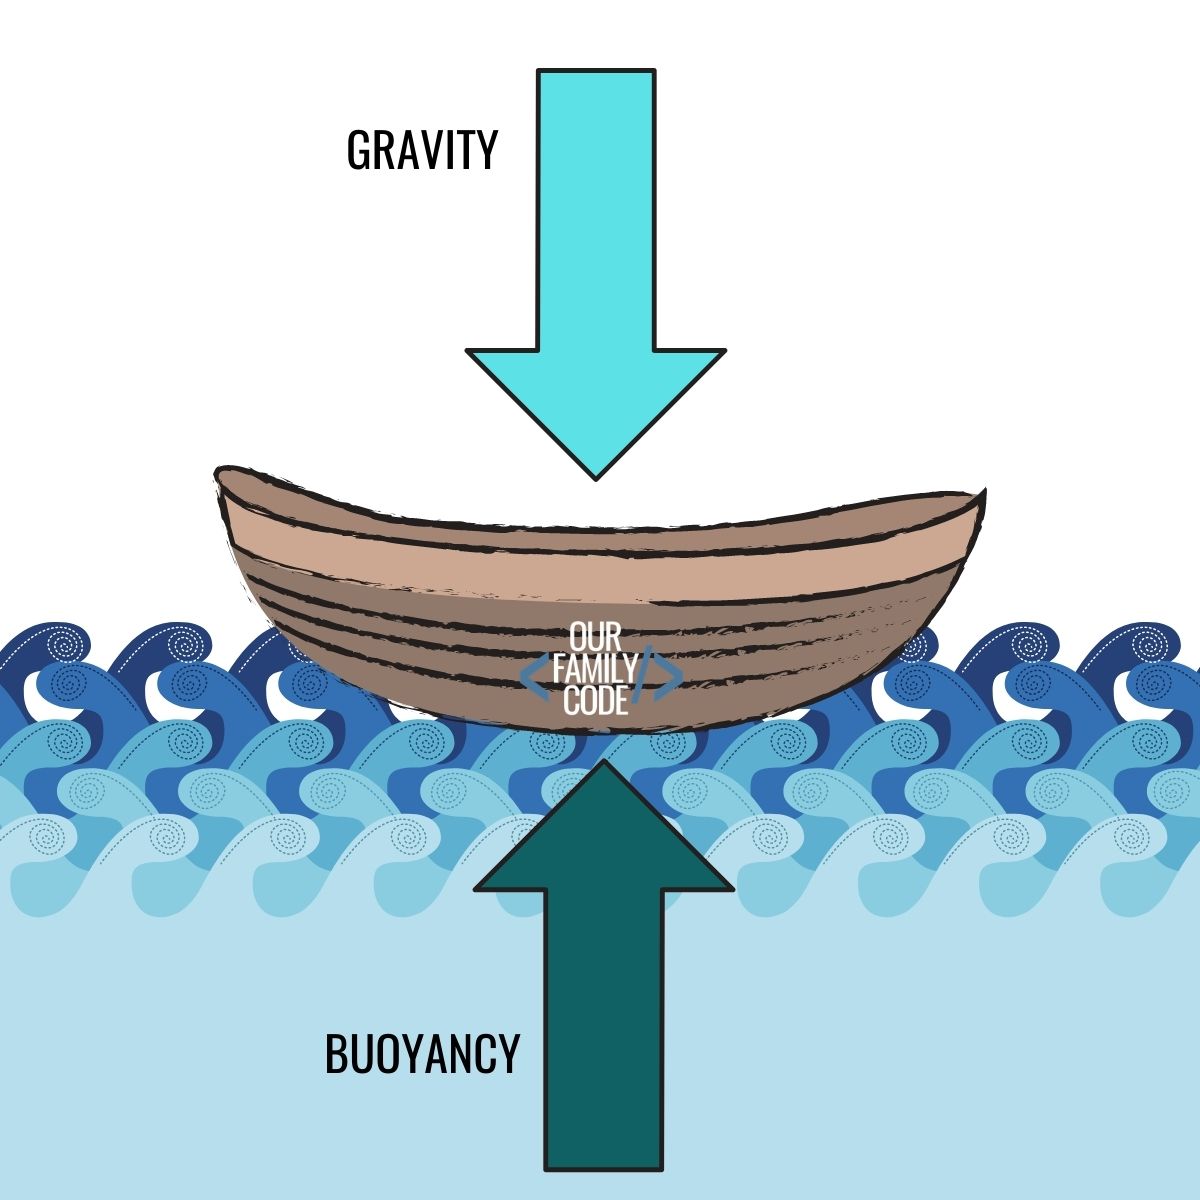 Whatever Floats Your Boat Buoyancy Steam Challenge